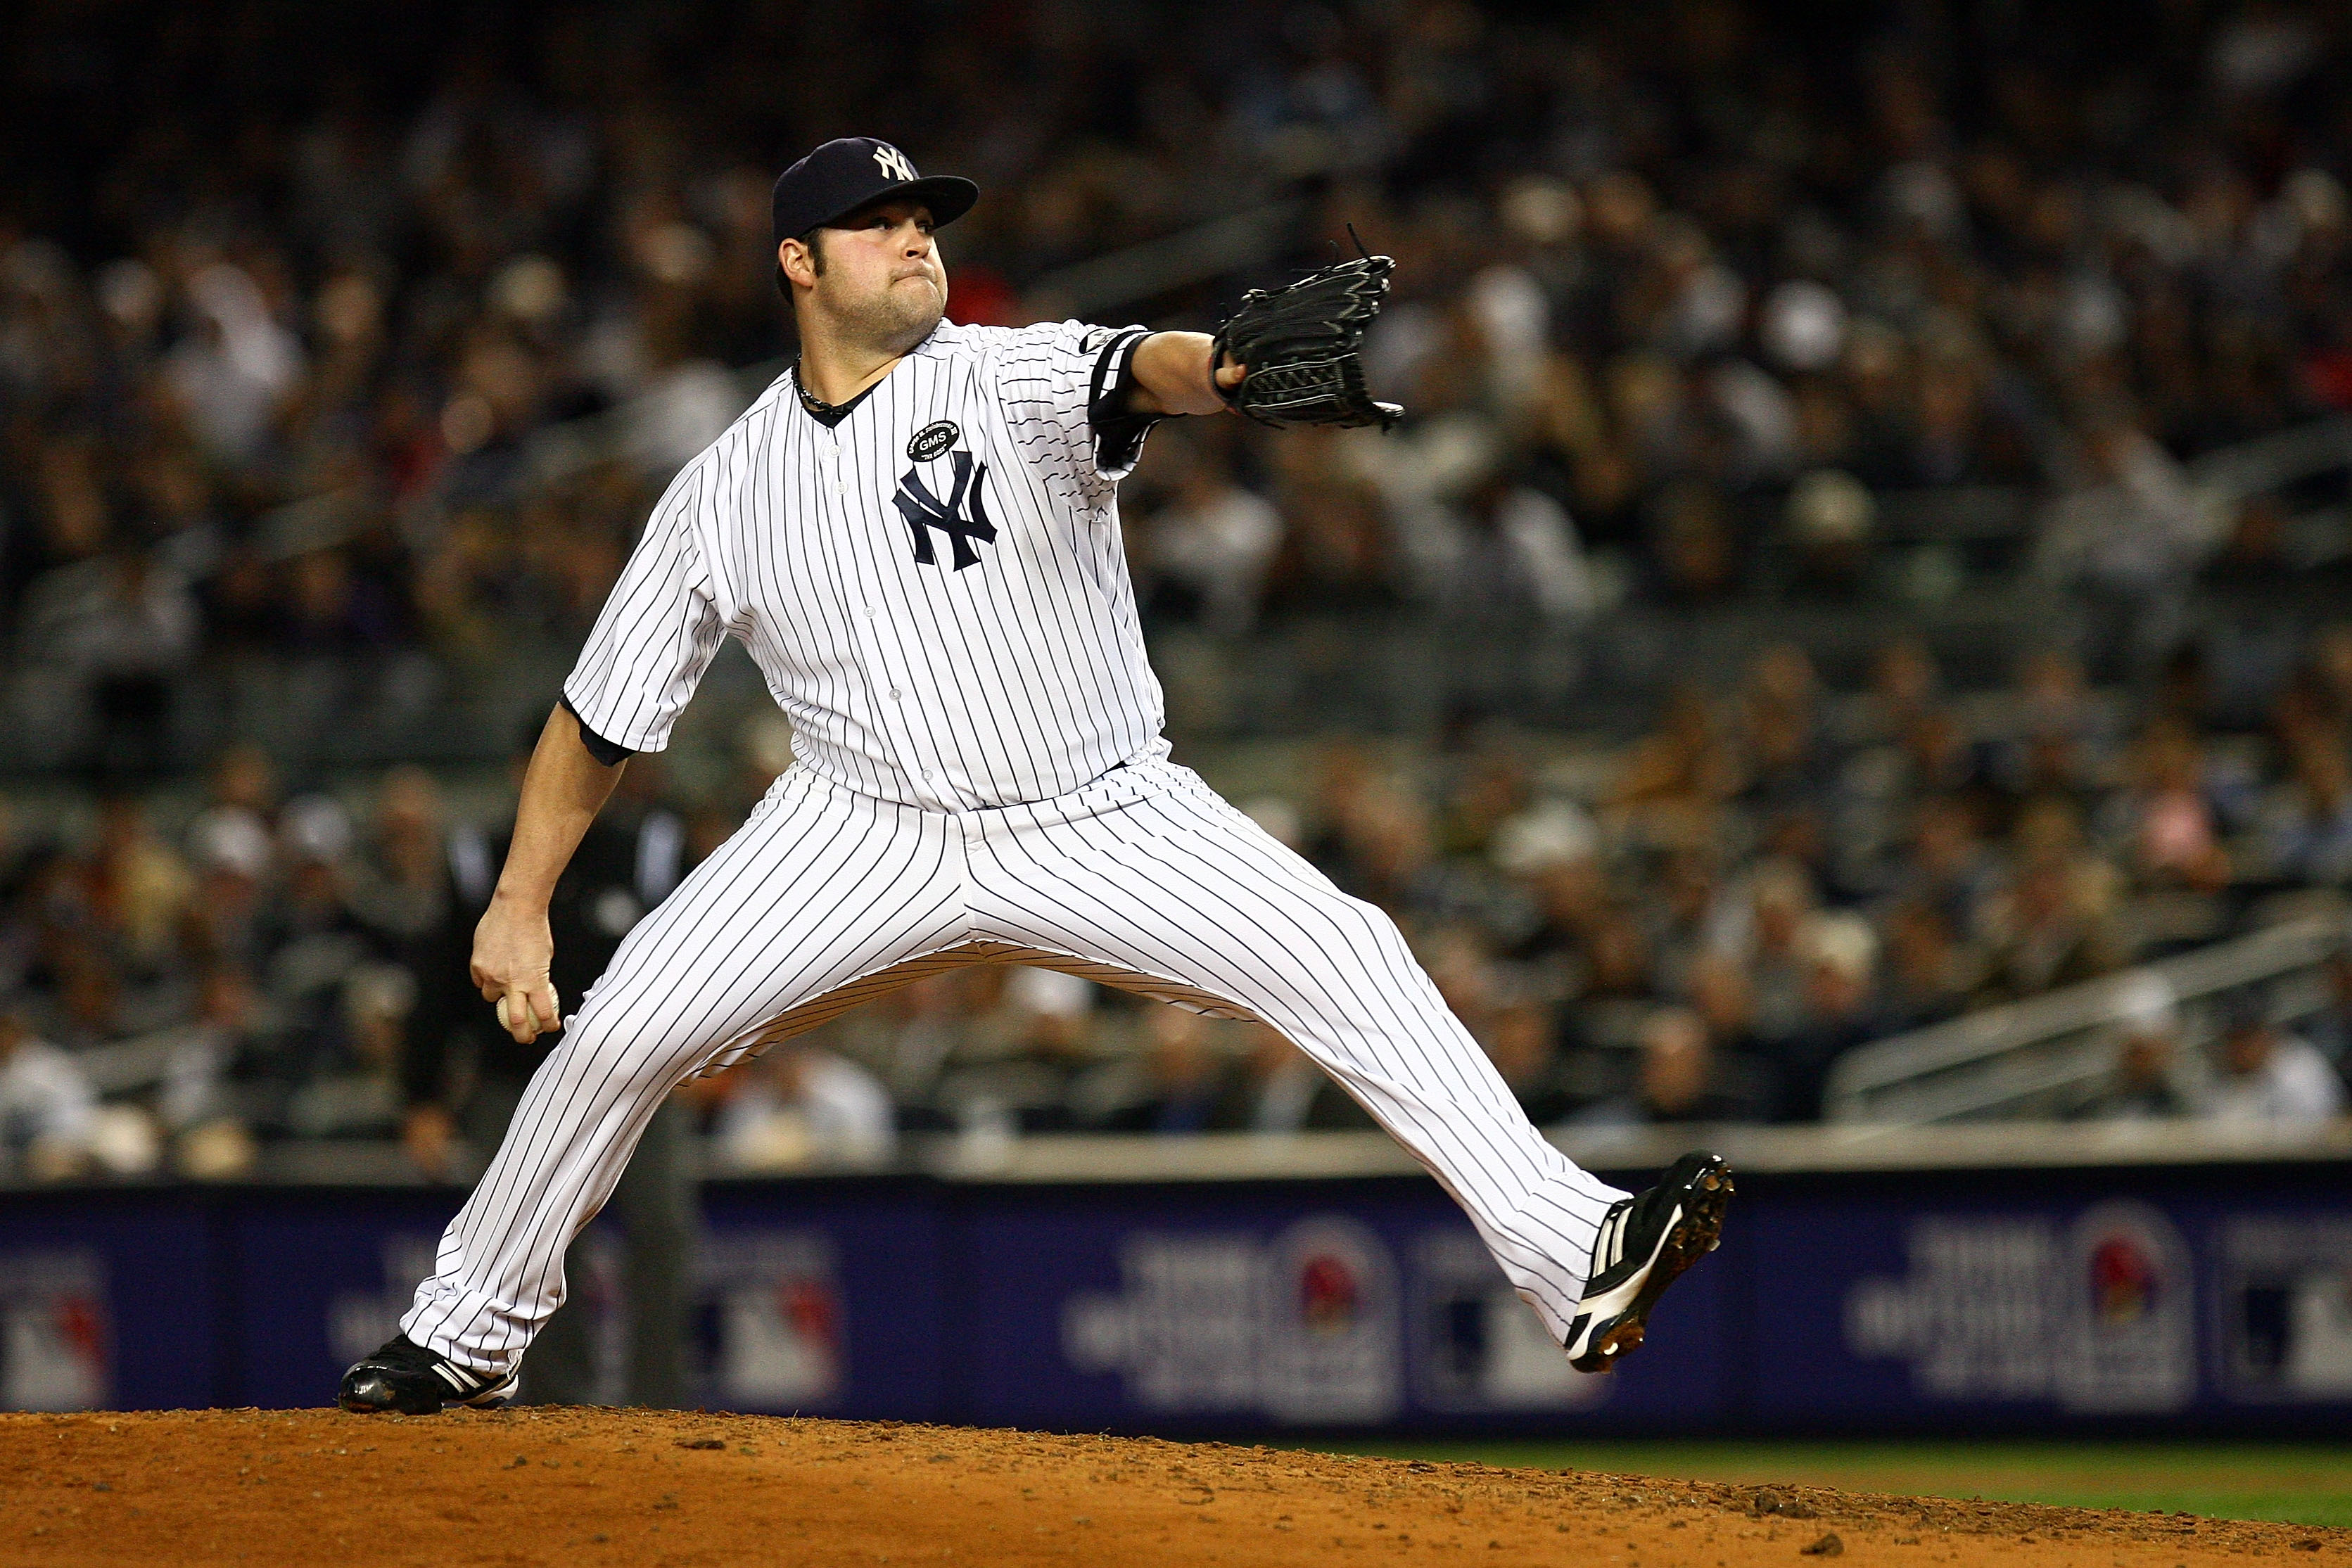 Joba Chamberlain turning into the pitcher the Yankees hoped he'd